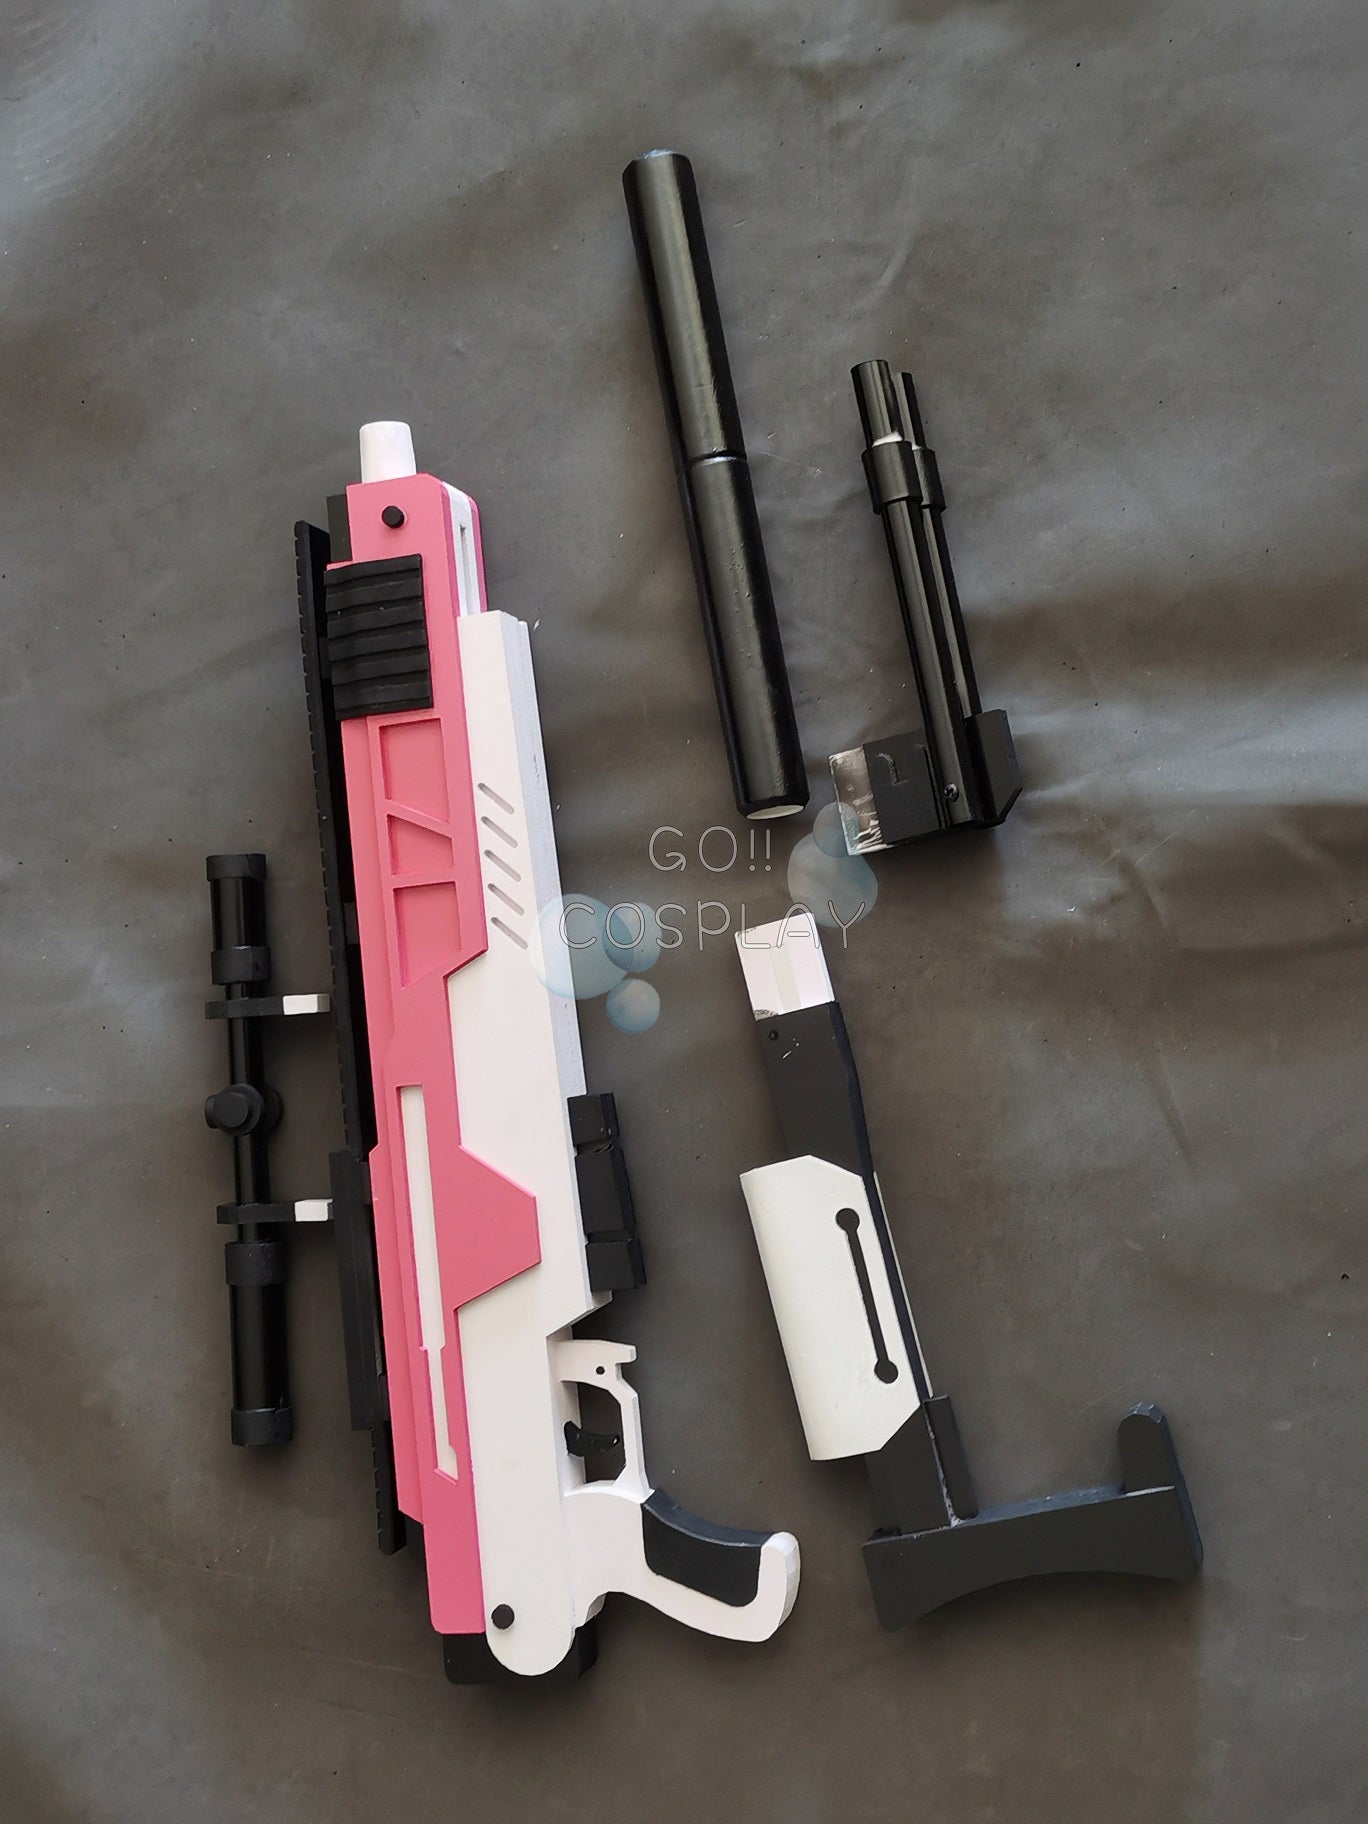 NIKKE Alice Weapon Replica Cosplay Sniper Rifle for Sale